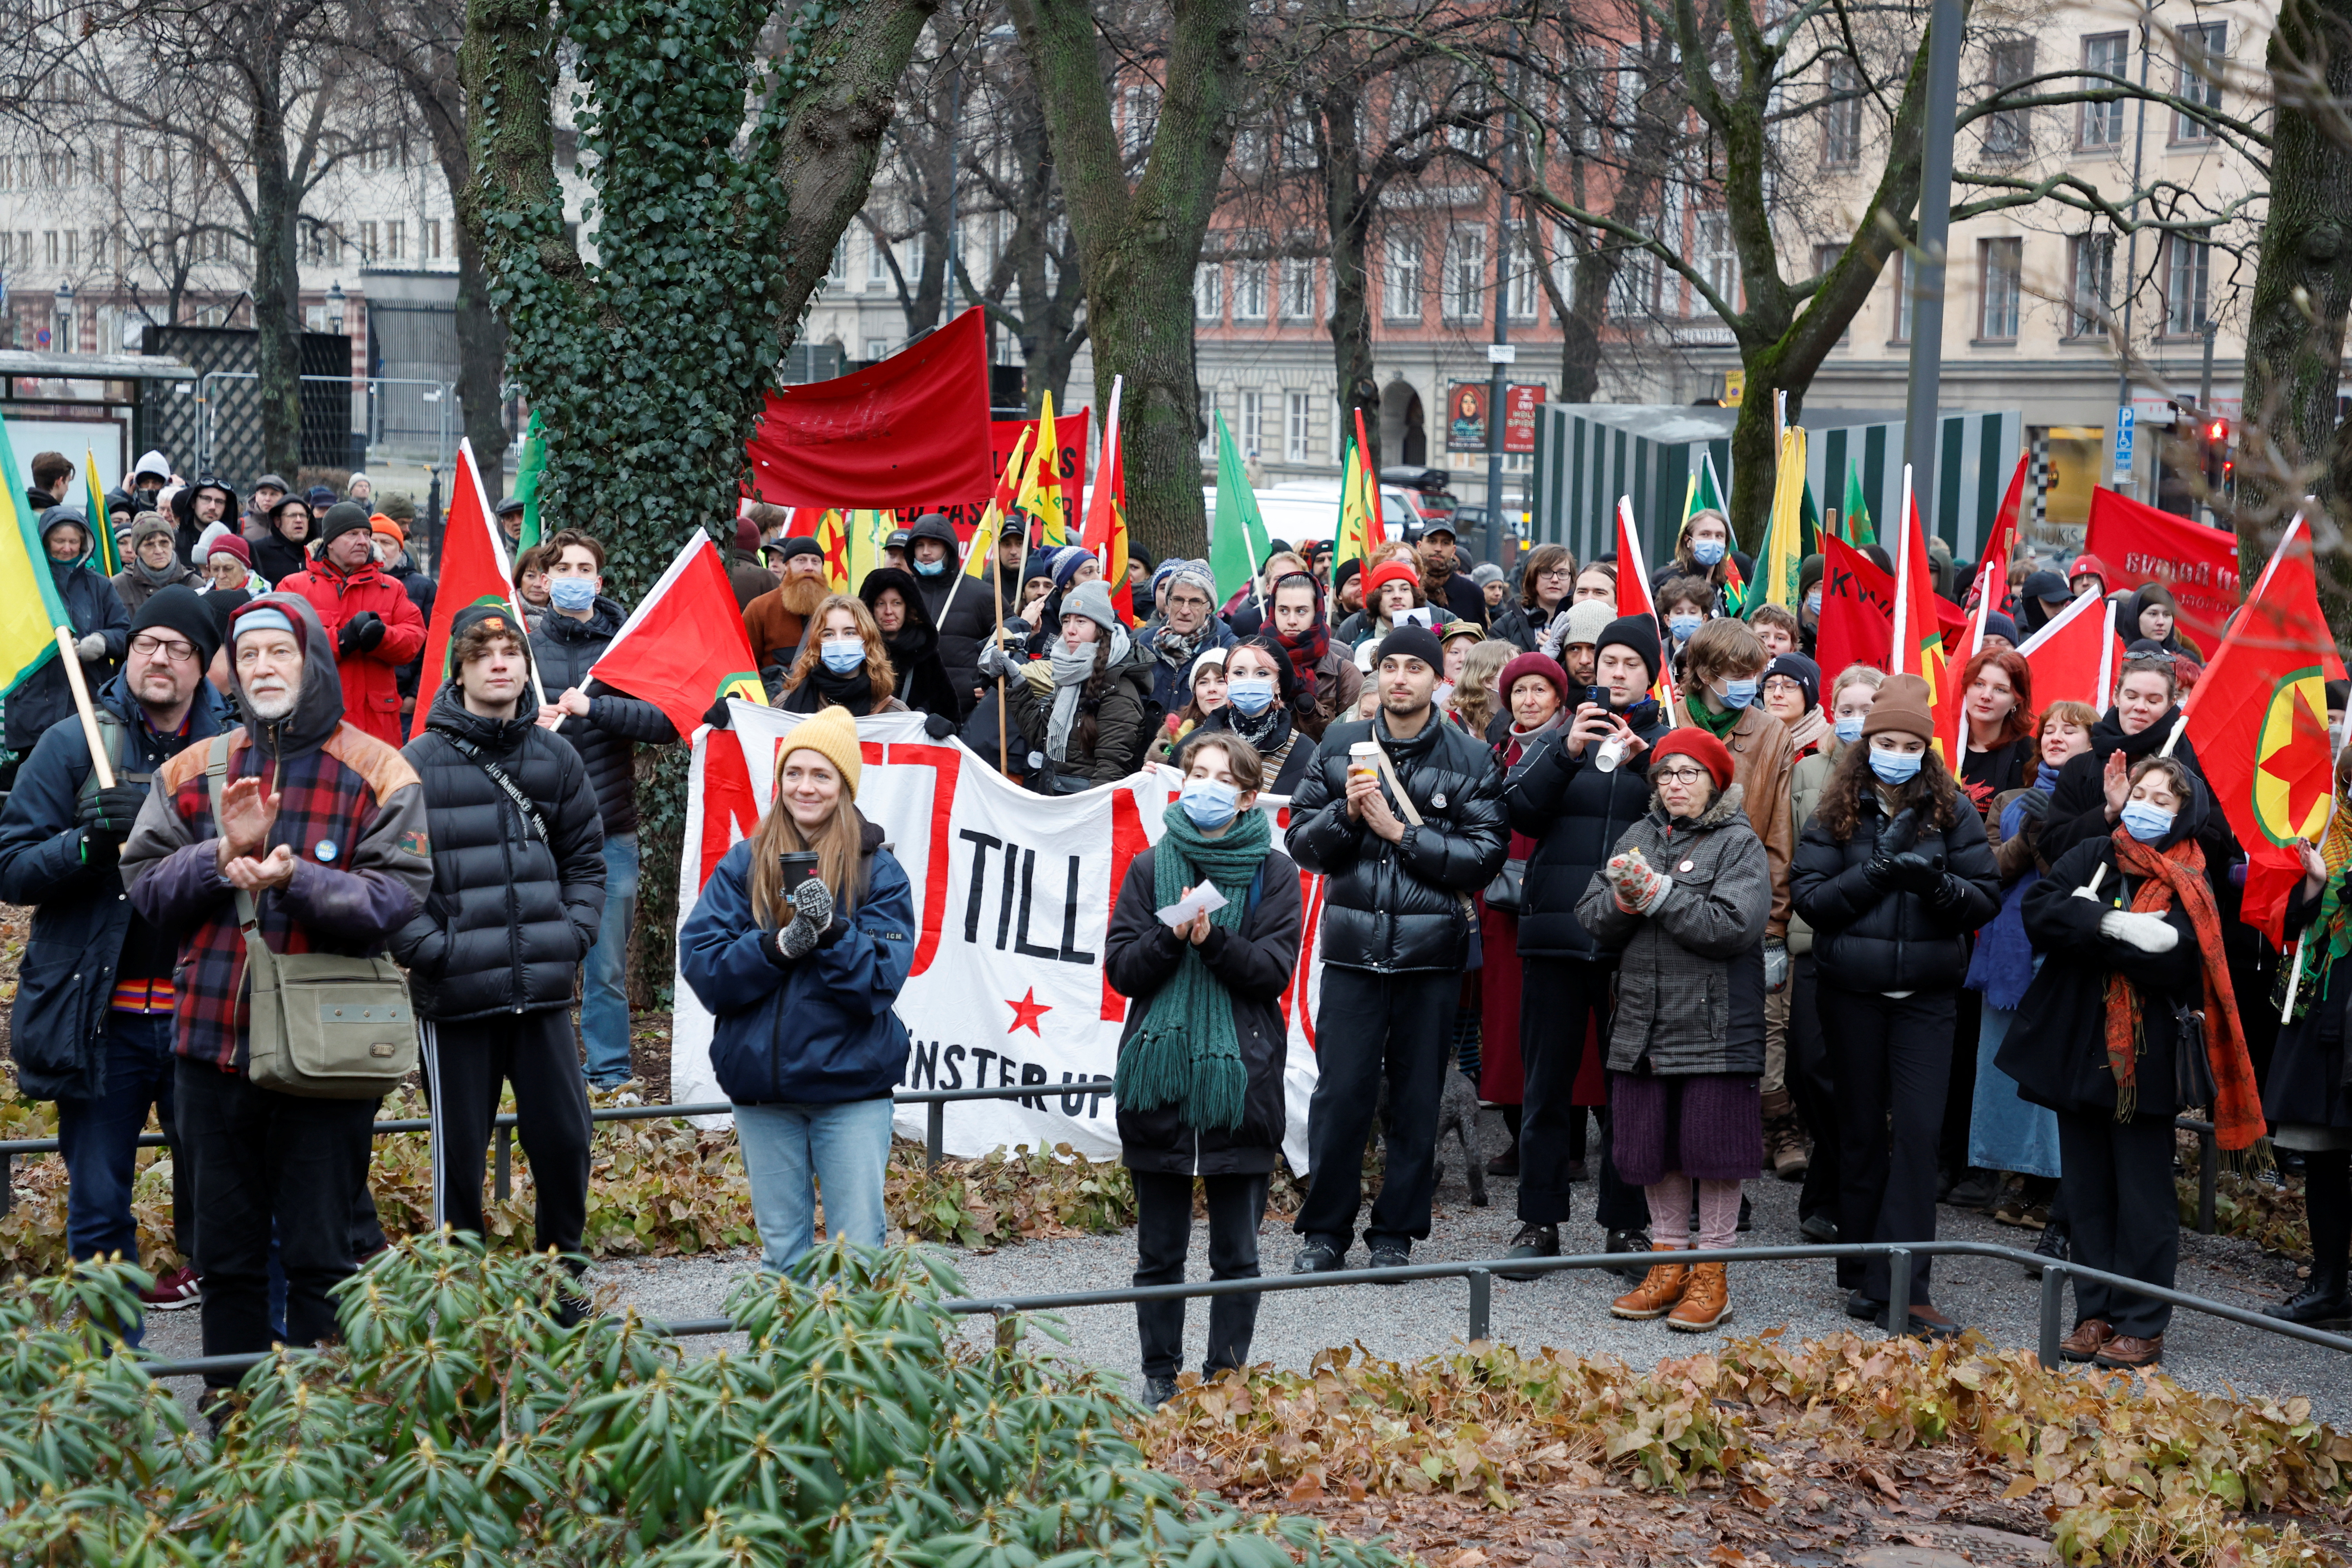 There is a demonstration in Stockholm against Turkish President Recep Tayyip Erdogan and Sweden's bid for NATO